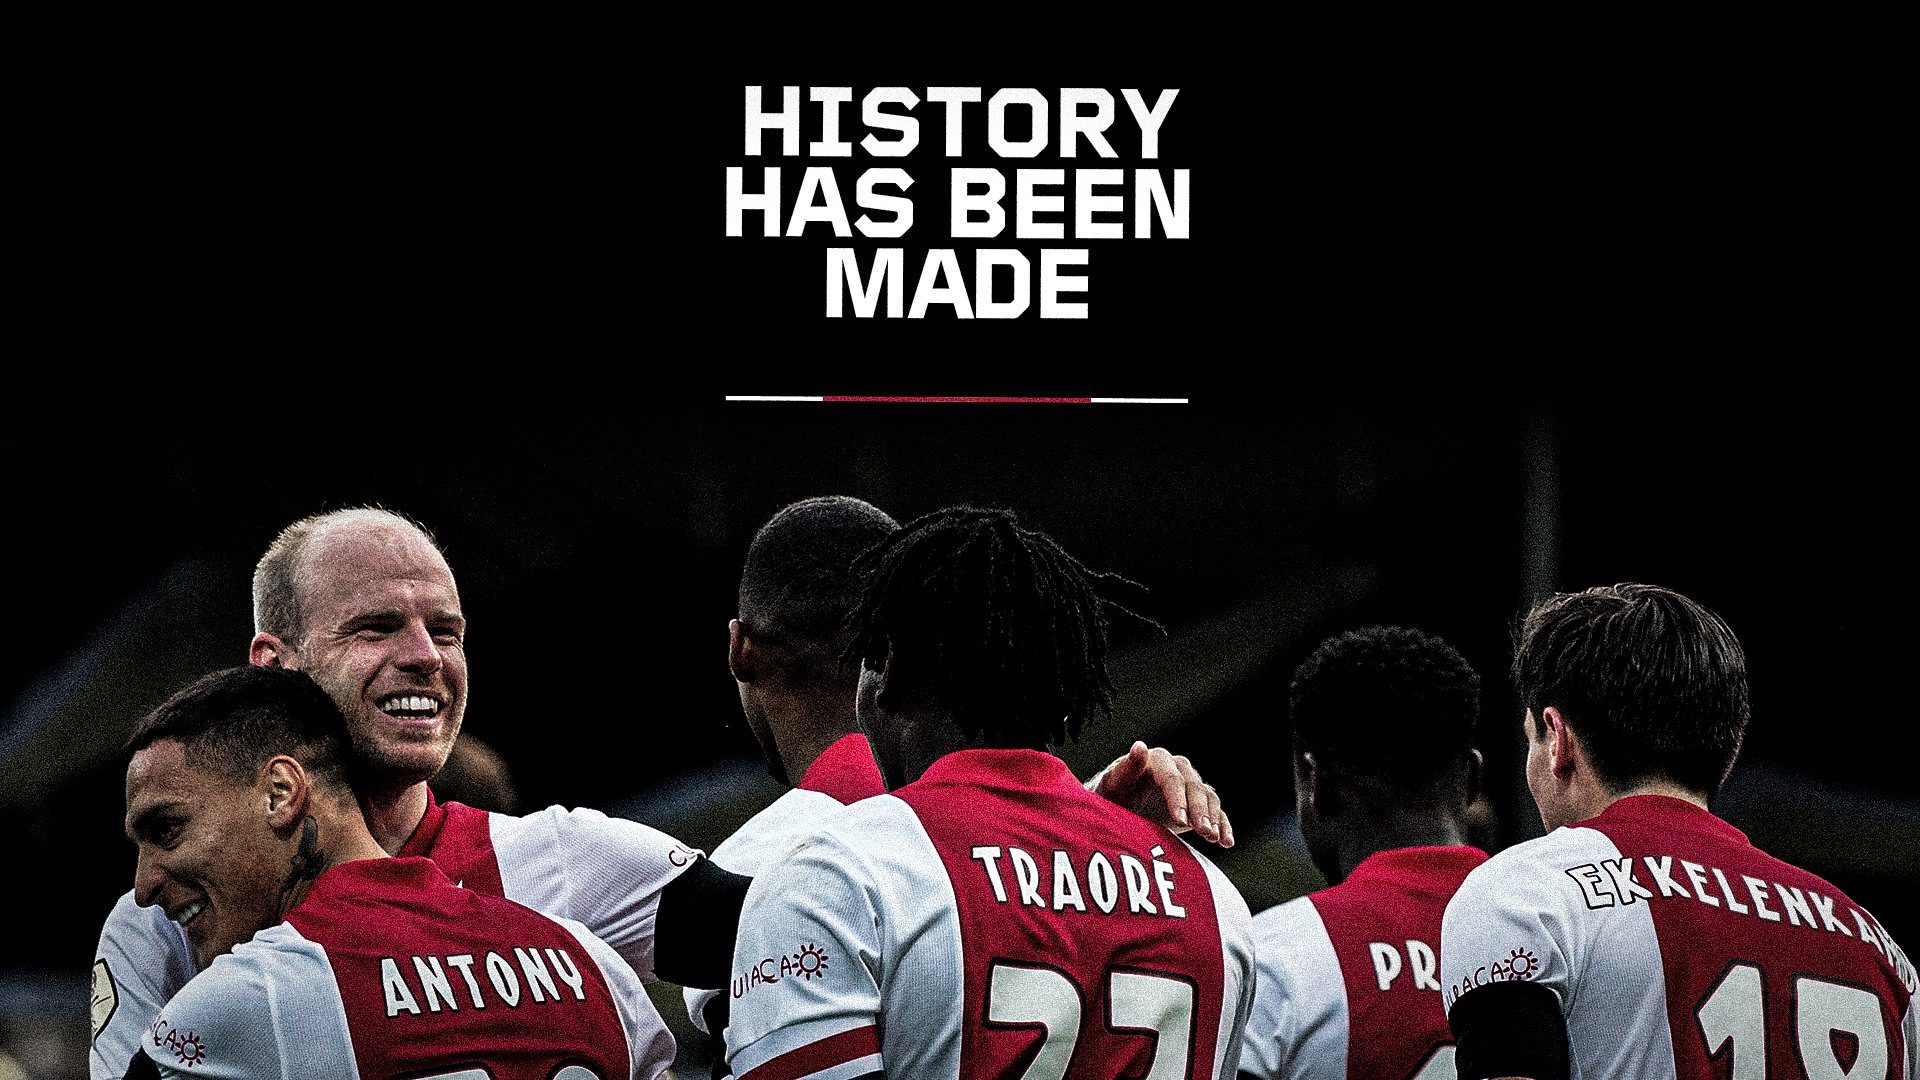 The new Ajax is still scary: Record-breaking historic win in the Eredivisie with 13 goals scored!